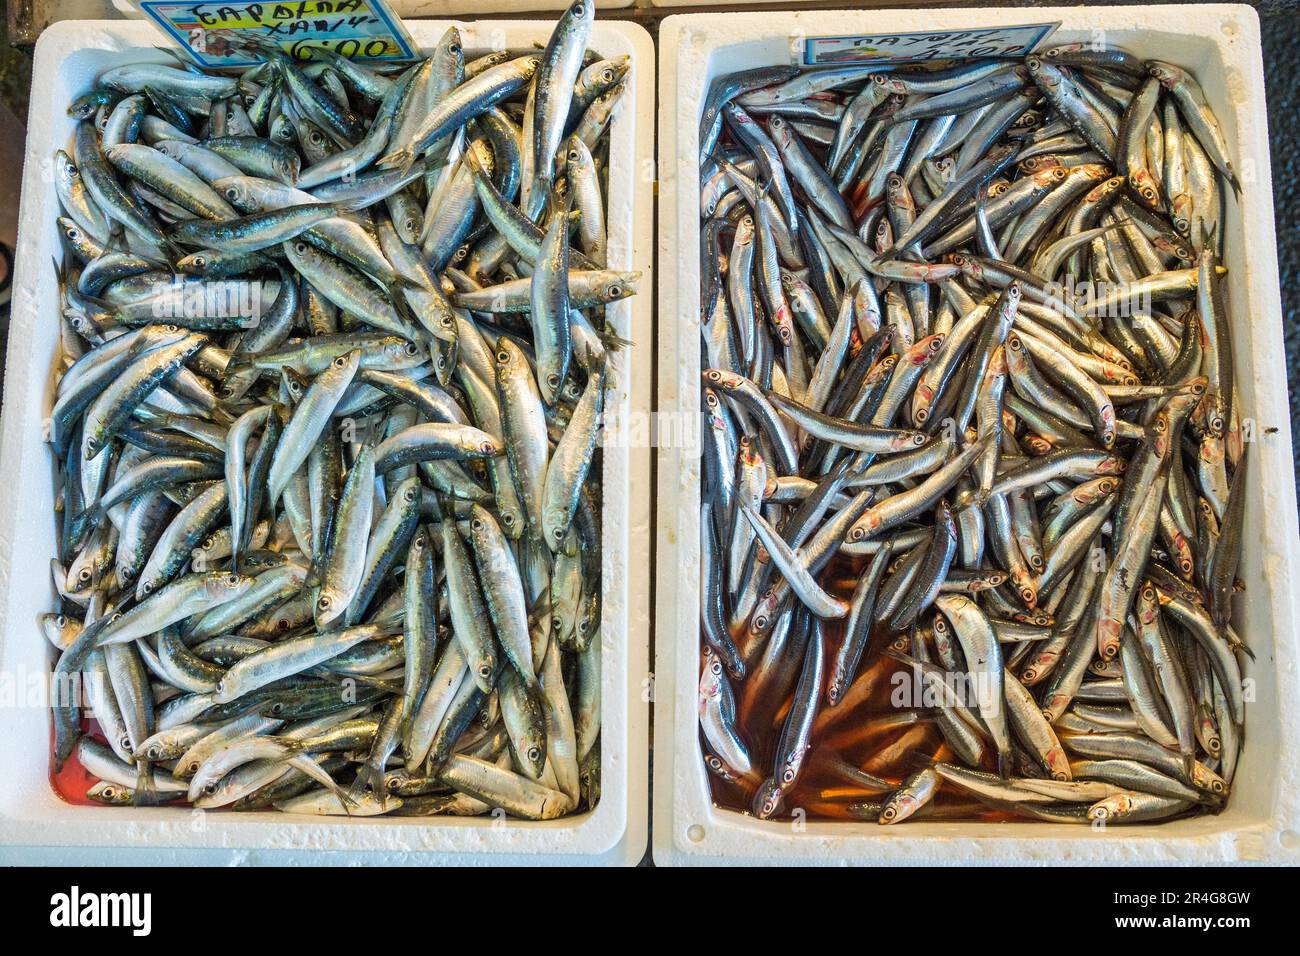 Small fish are sold at a market Stock Photo